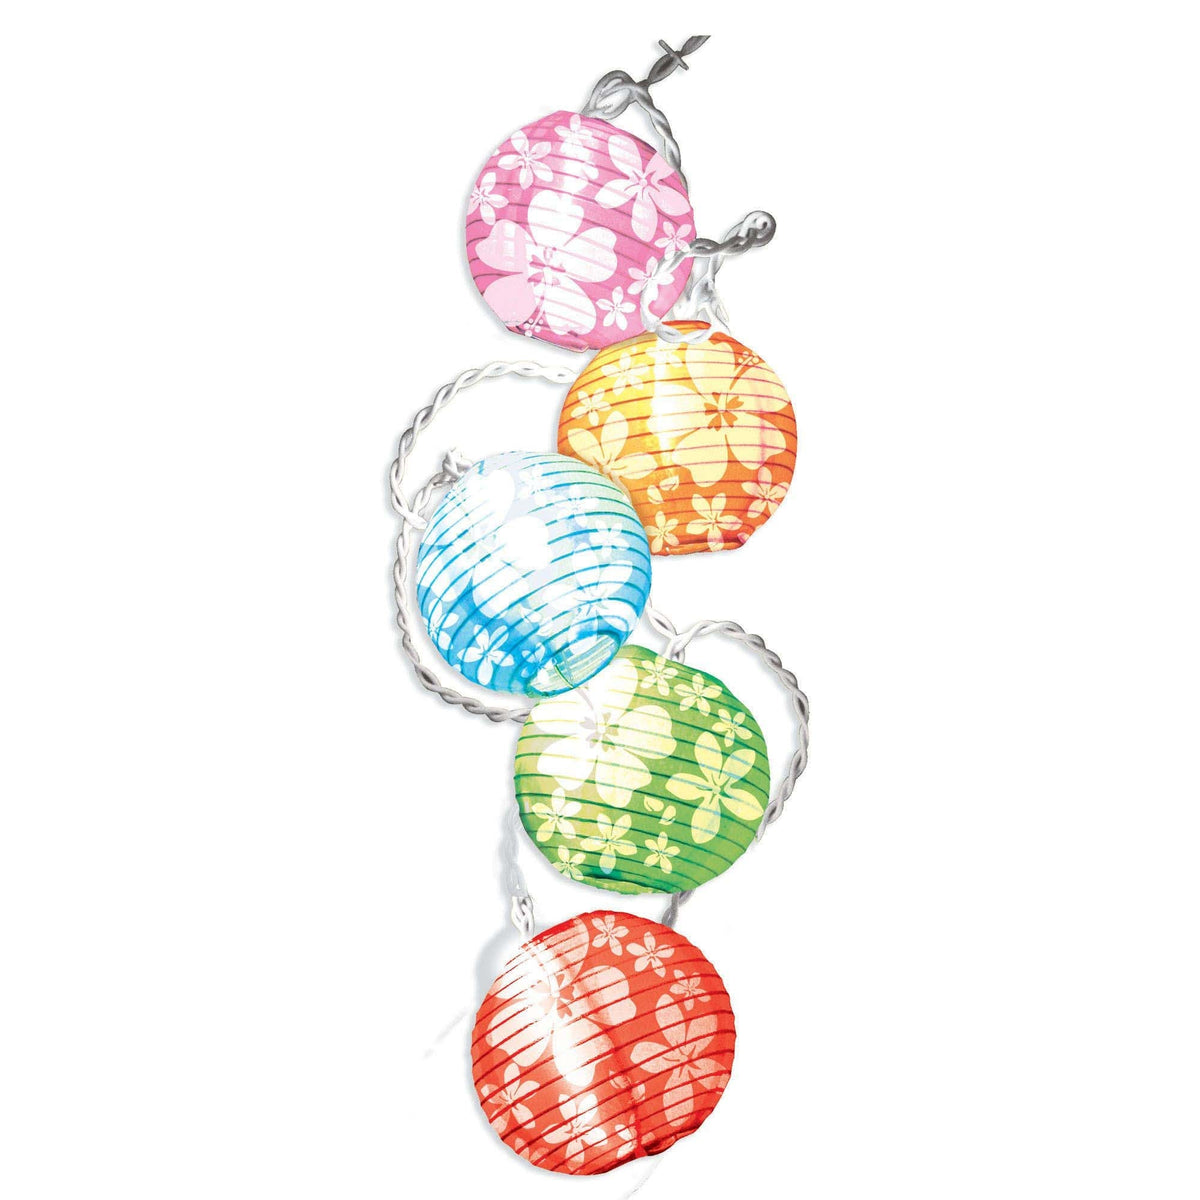 AMSCAN CA Theme Party Round Latern Light Set with Flowers, 11 x 9 Inches, 1 Count